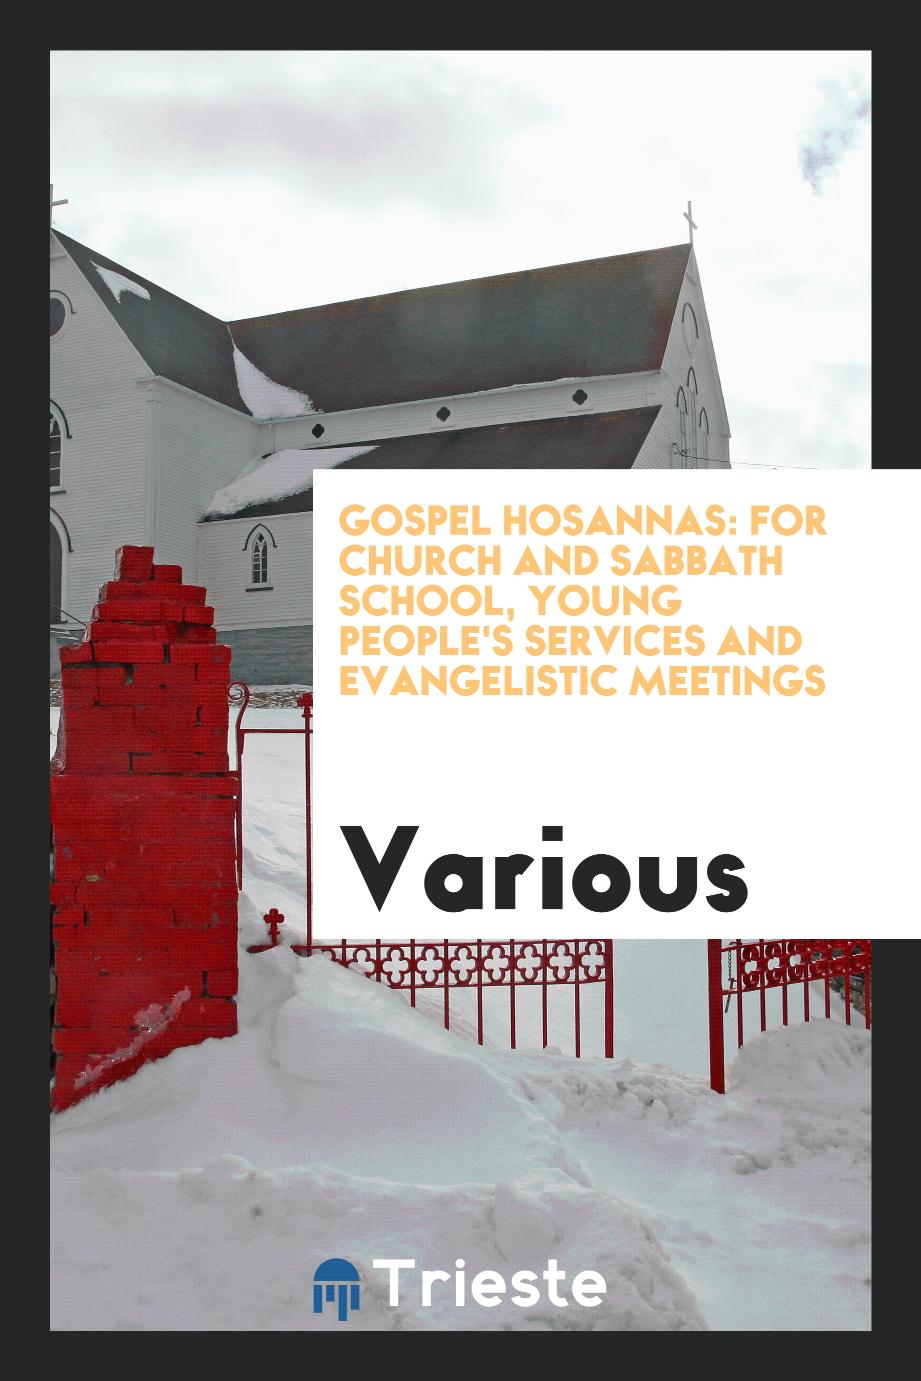 Gospel hosannas: for church and Sabbath school, young people's services and evangelistic meetings